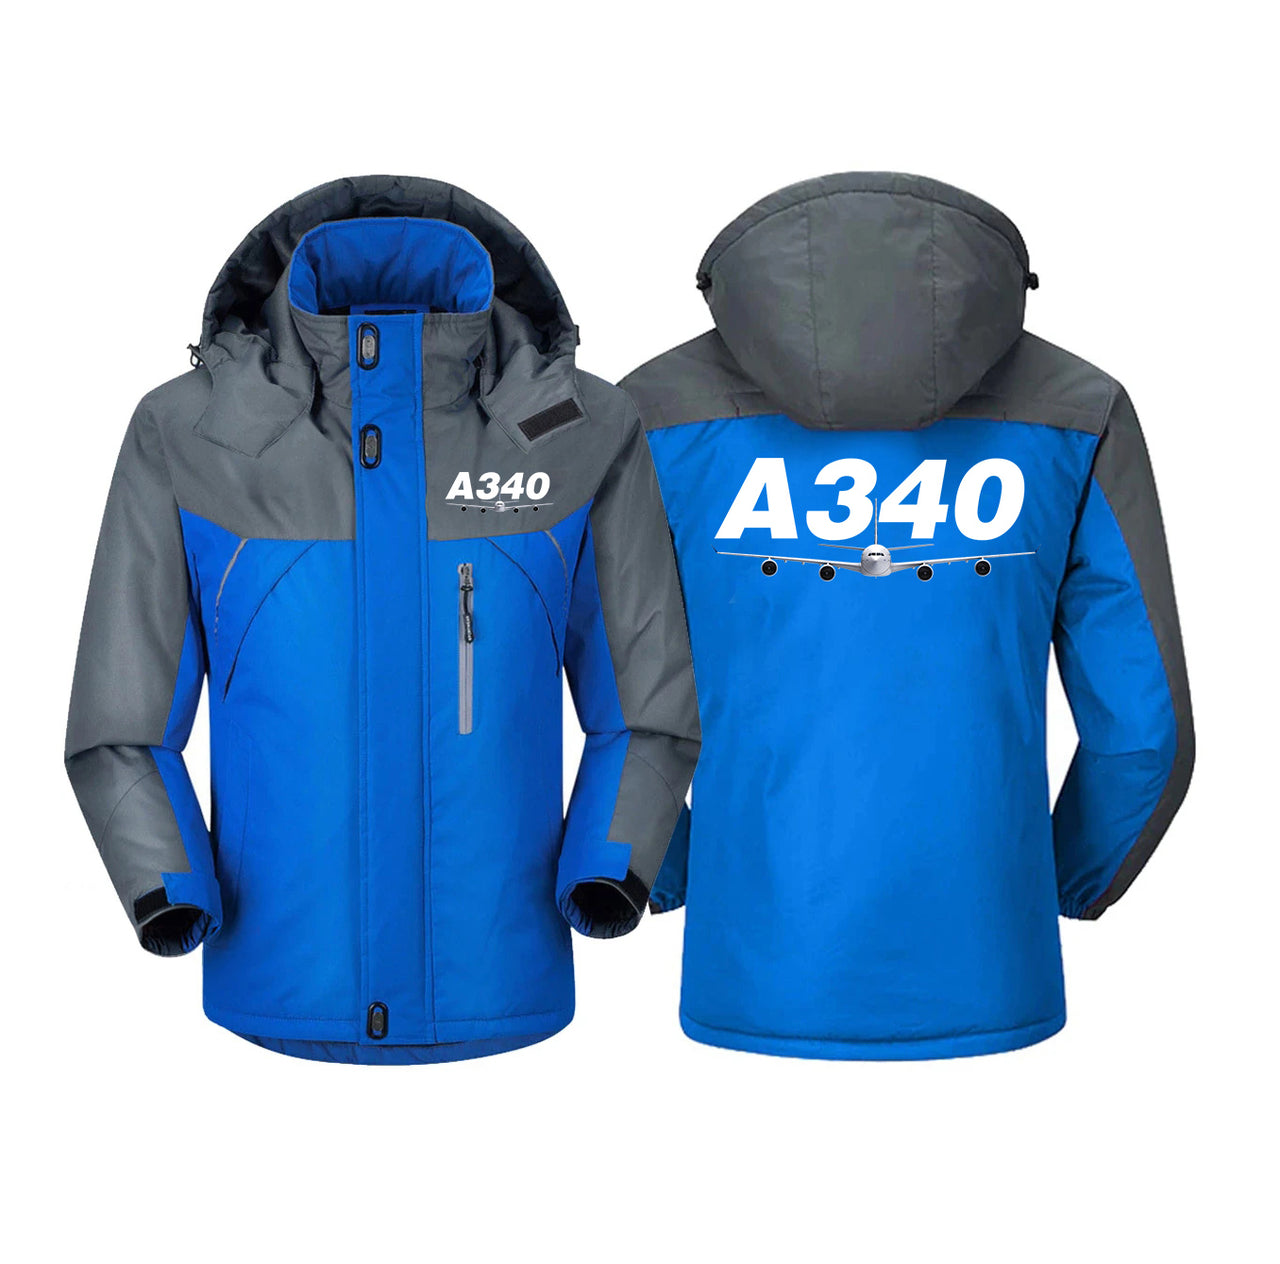 Super Airbus A340 Designed Thick Winter Jackets